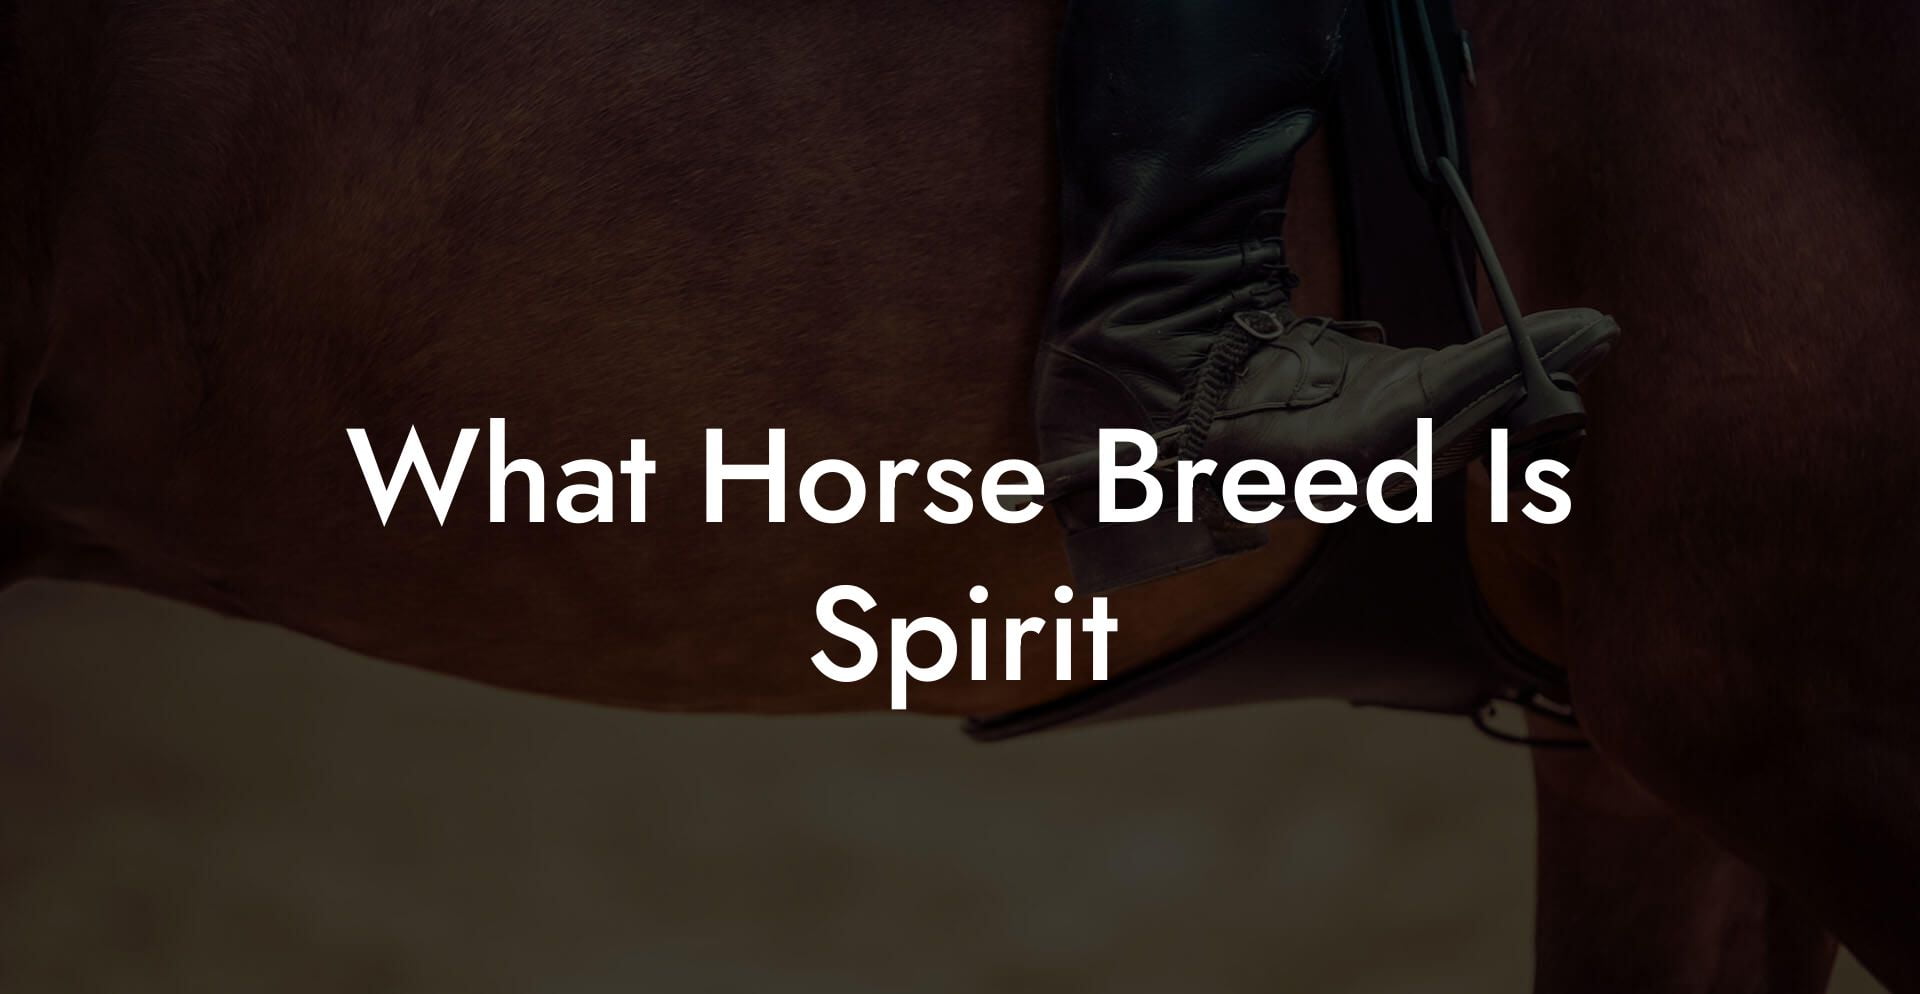 What Horse Breed Is Spirit